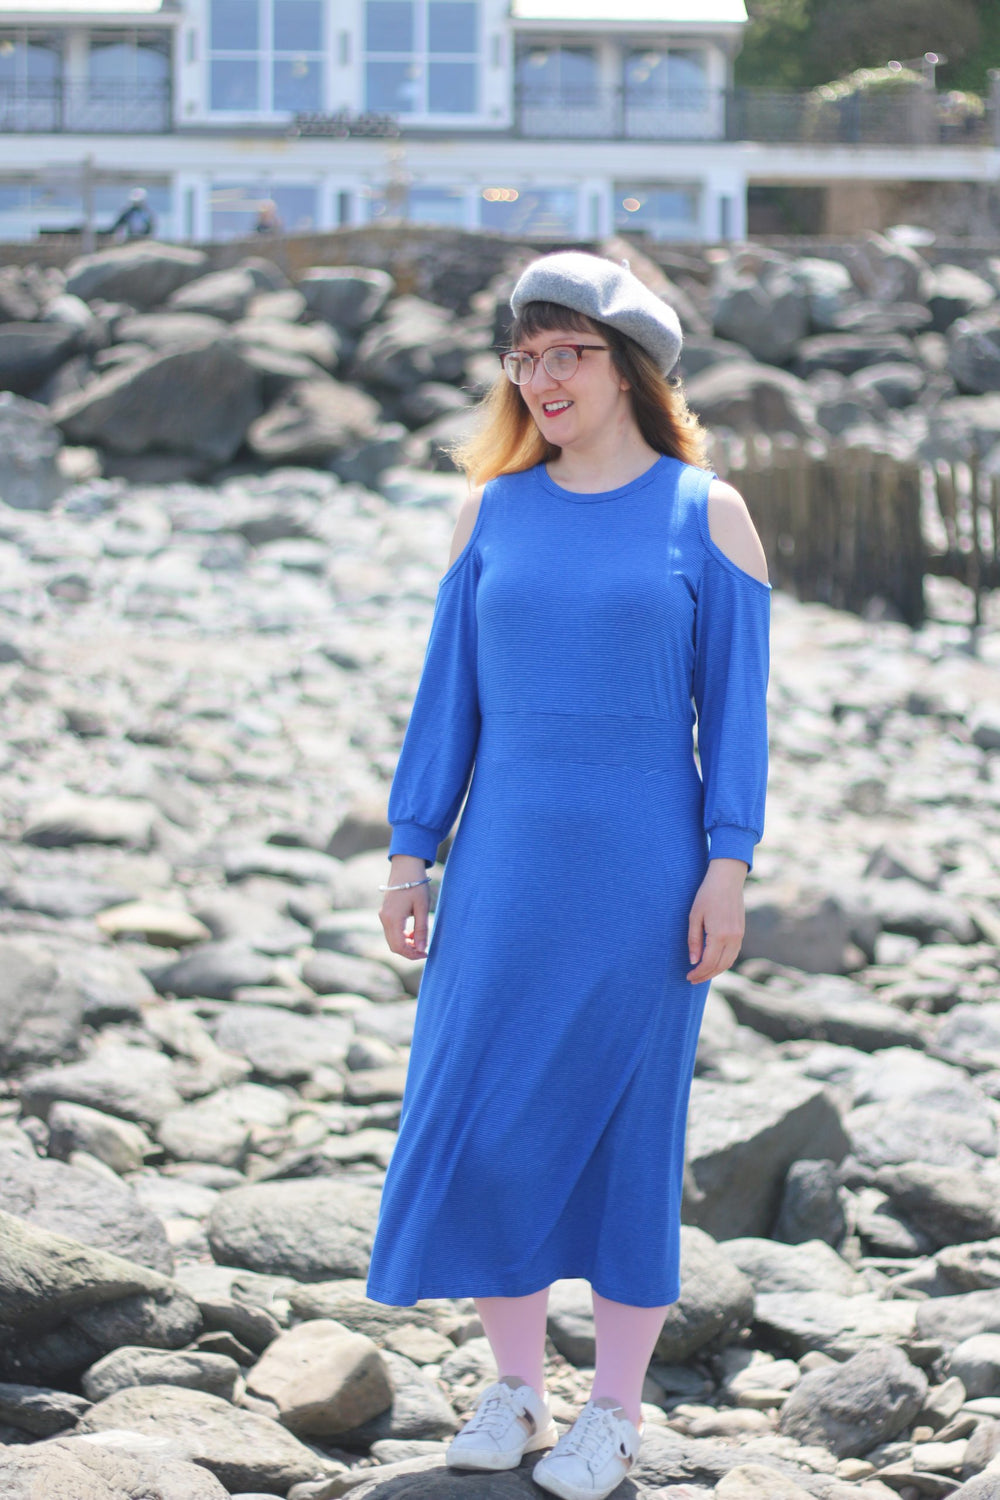 Women wearing the Teres Dress sewing pattern from Charlotte Emma Patterns on The Fold Line. A knit dress pattern made in light to medium weight knit fabrics with 40-60% one-way stretch, such as jersey, cotton interlock, French terry or sweatshirting fabri